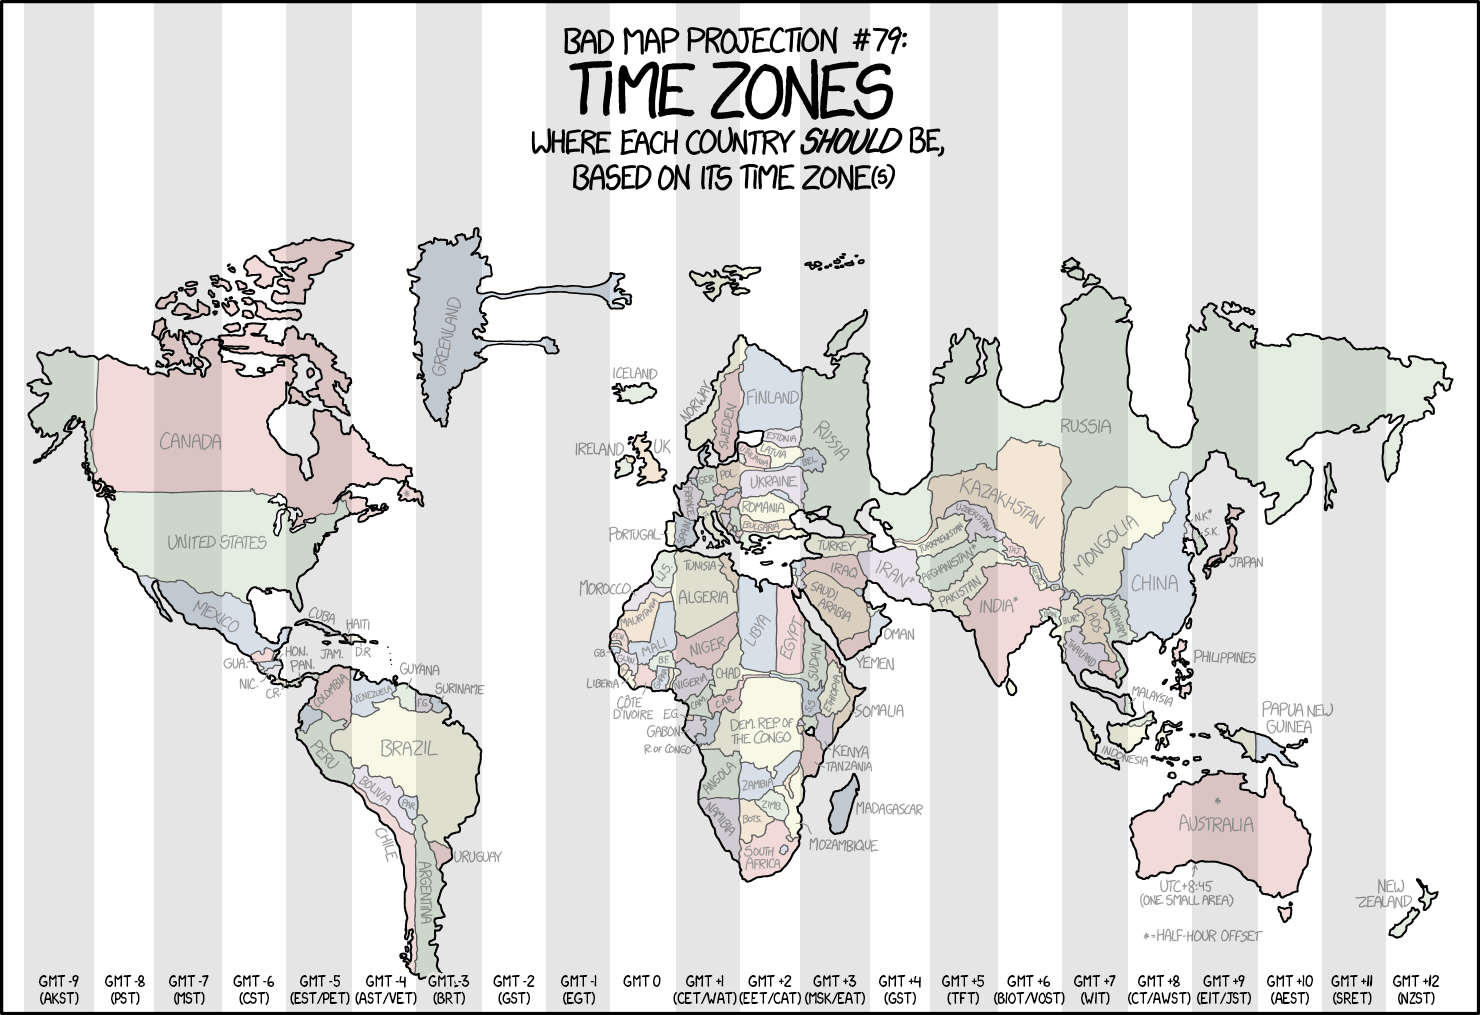 Distorted Map Shows Each Country Forced Into Its Time Zone